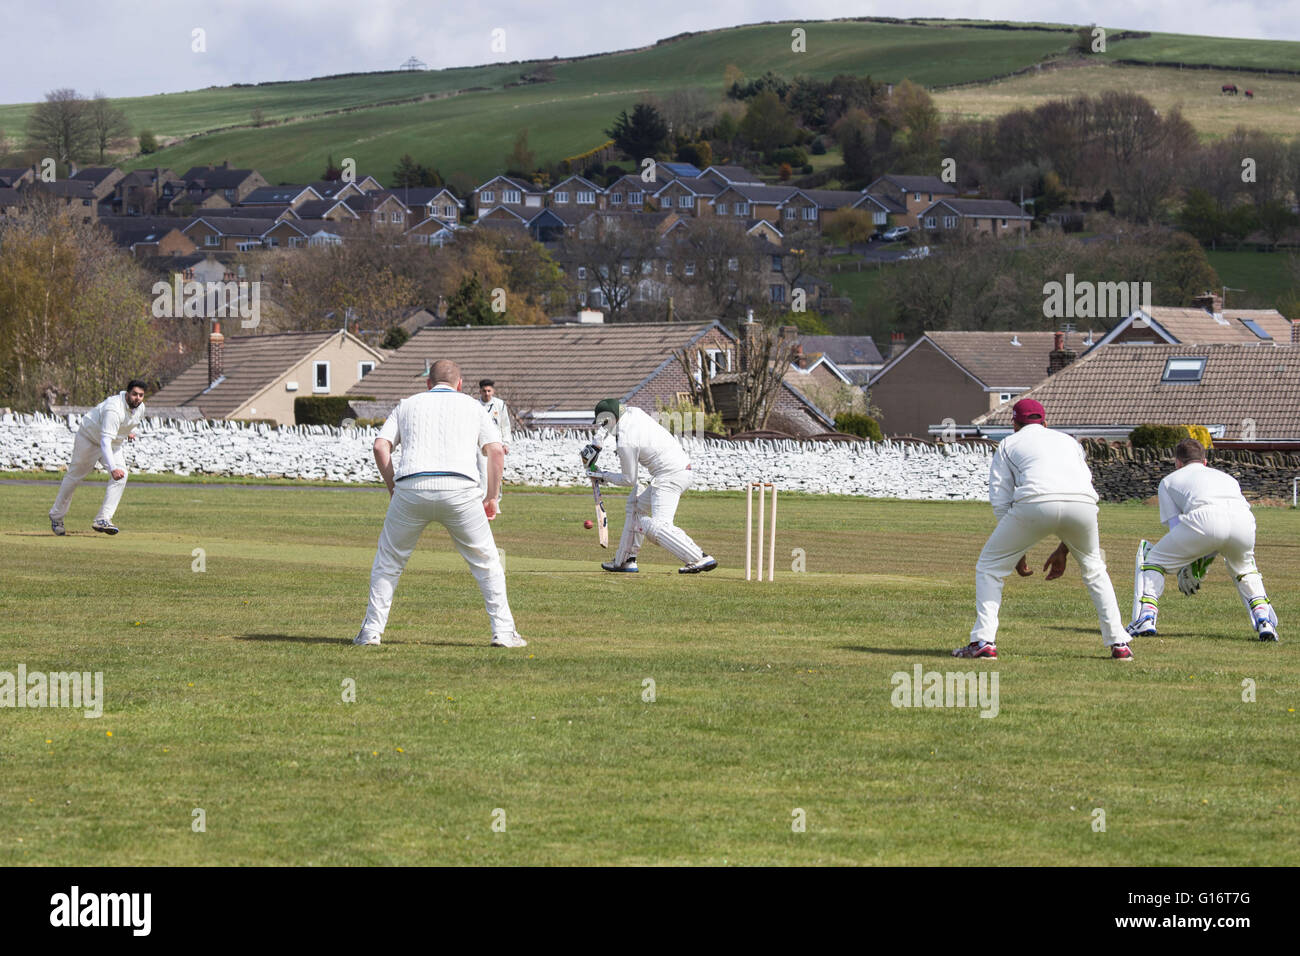 English village cricket match with bowler delivering ball to a batsman Stock Photo